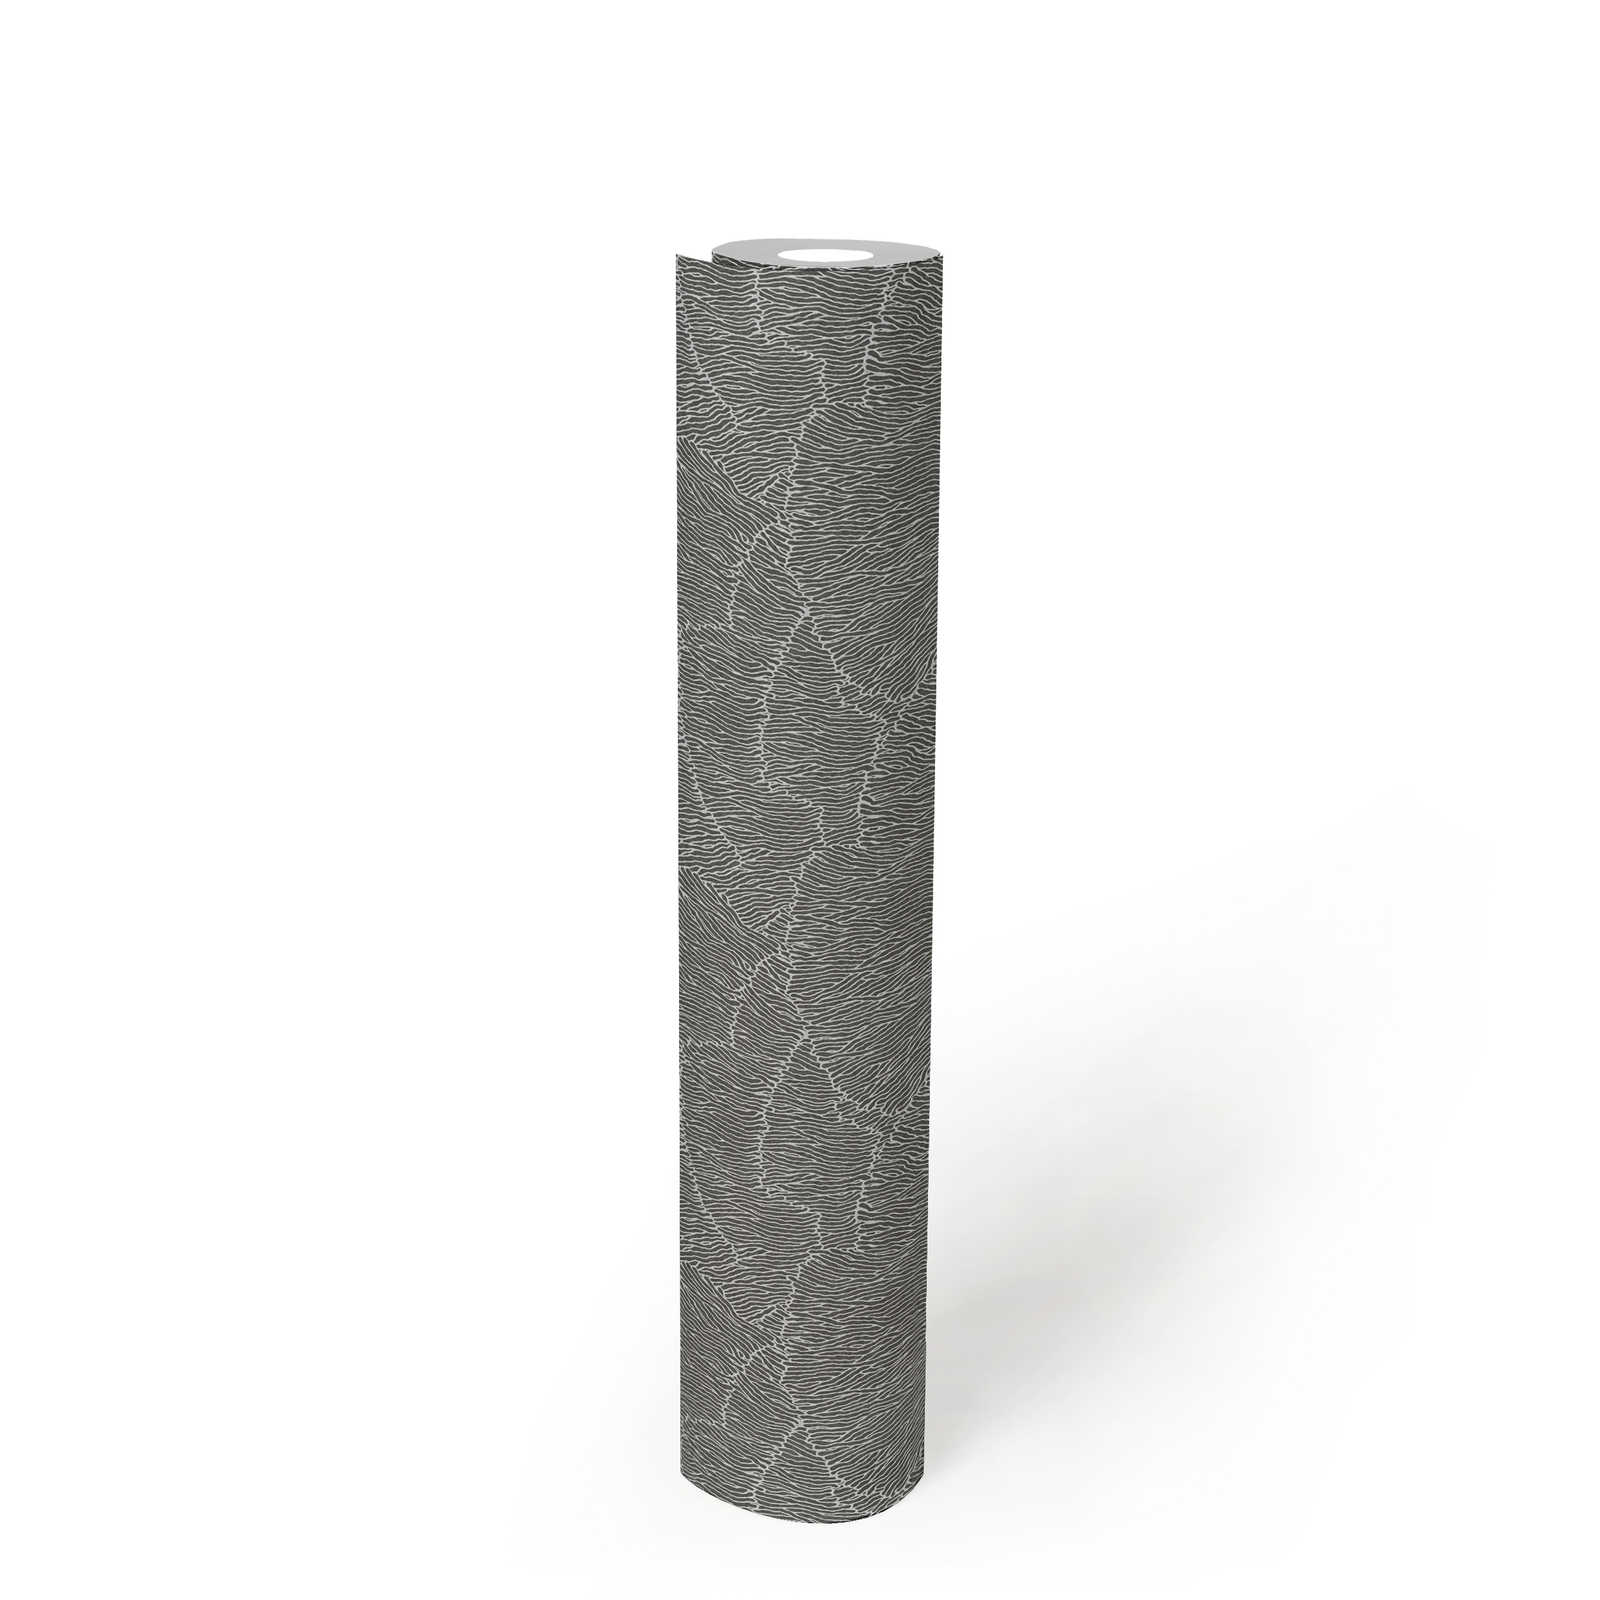             Abstract Wallpaper With Line Pattern - Silver, Black, Metallic
        